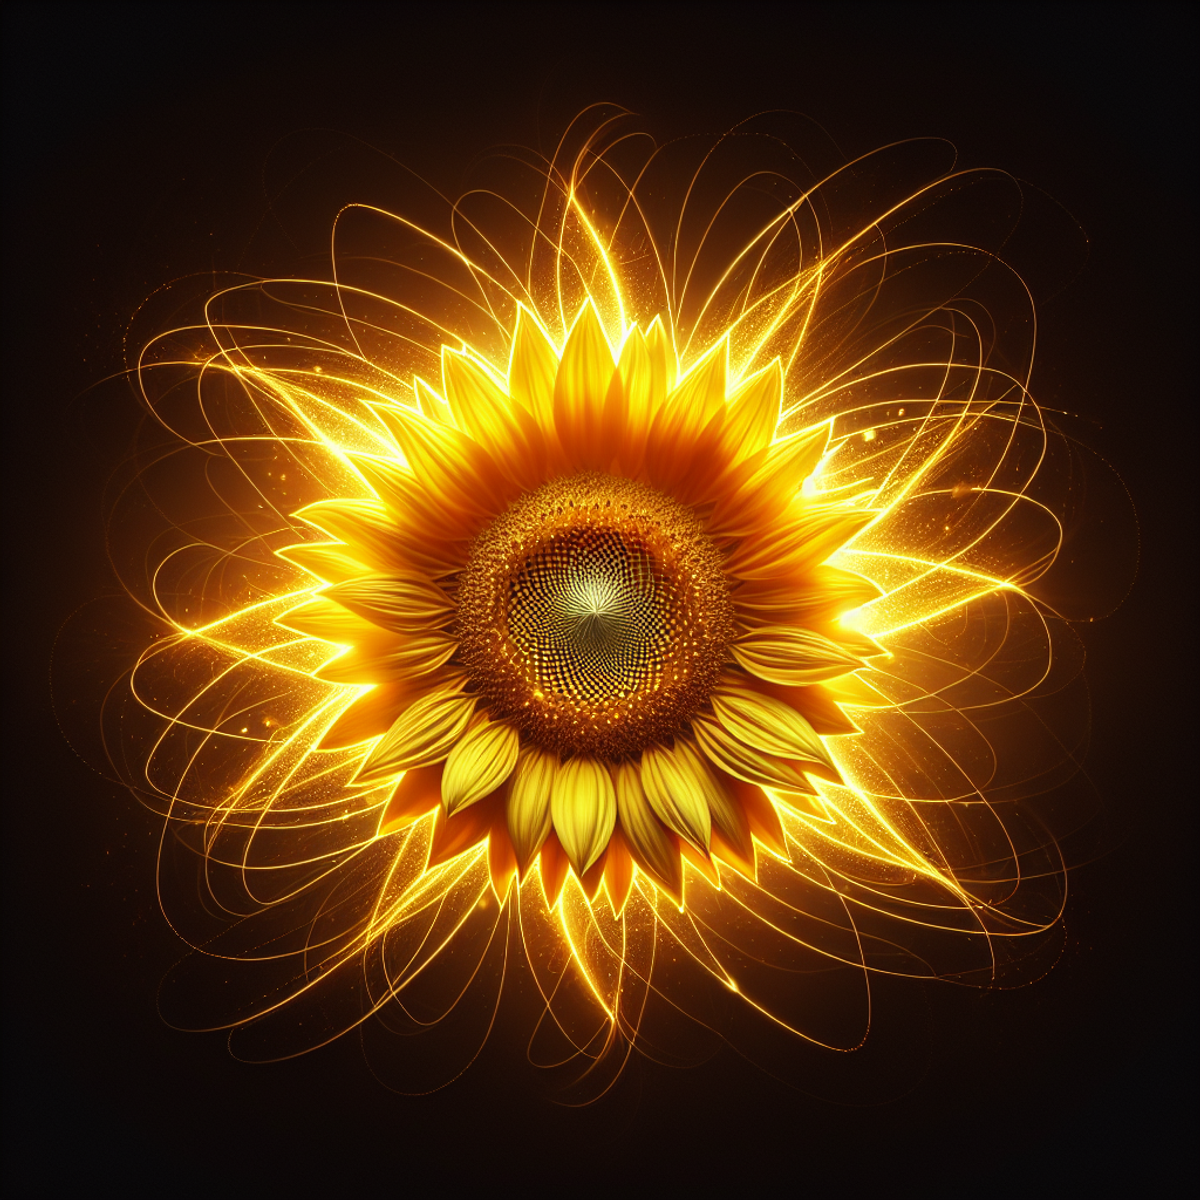 A Vibrant Sunflower in Full Bloom, Emananating Glowing Light and a Halo of Radiance.